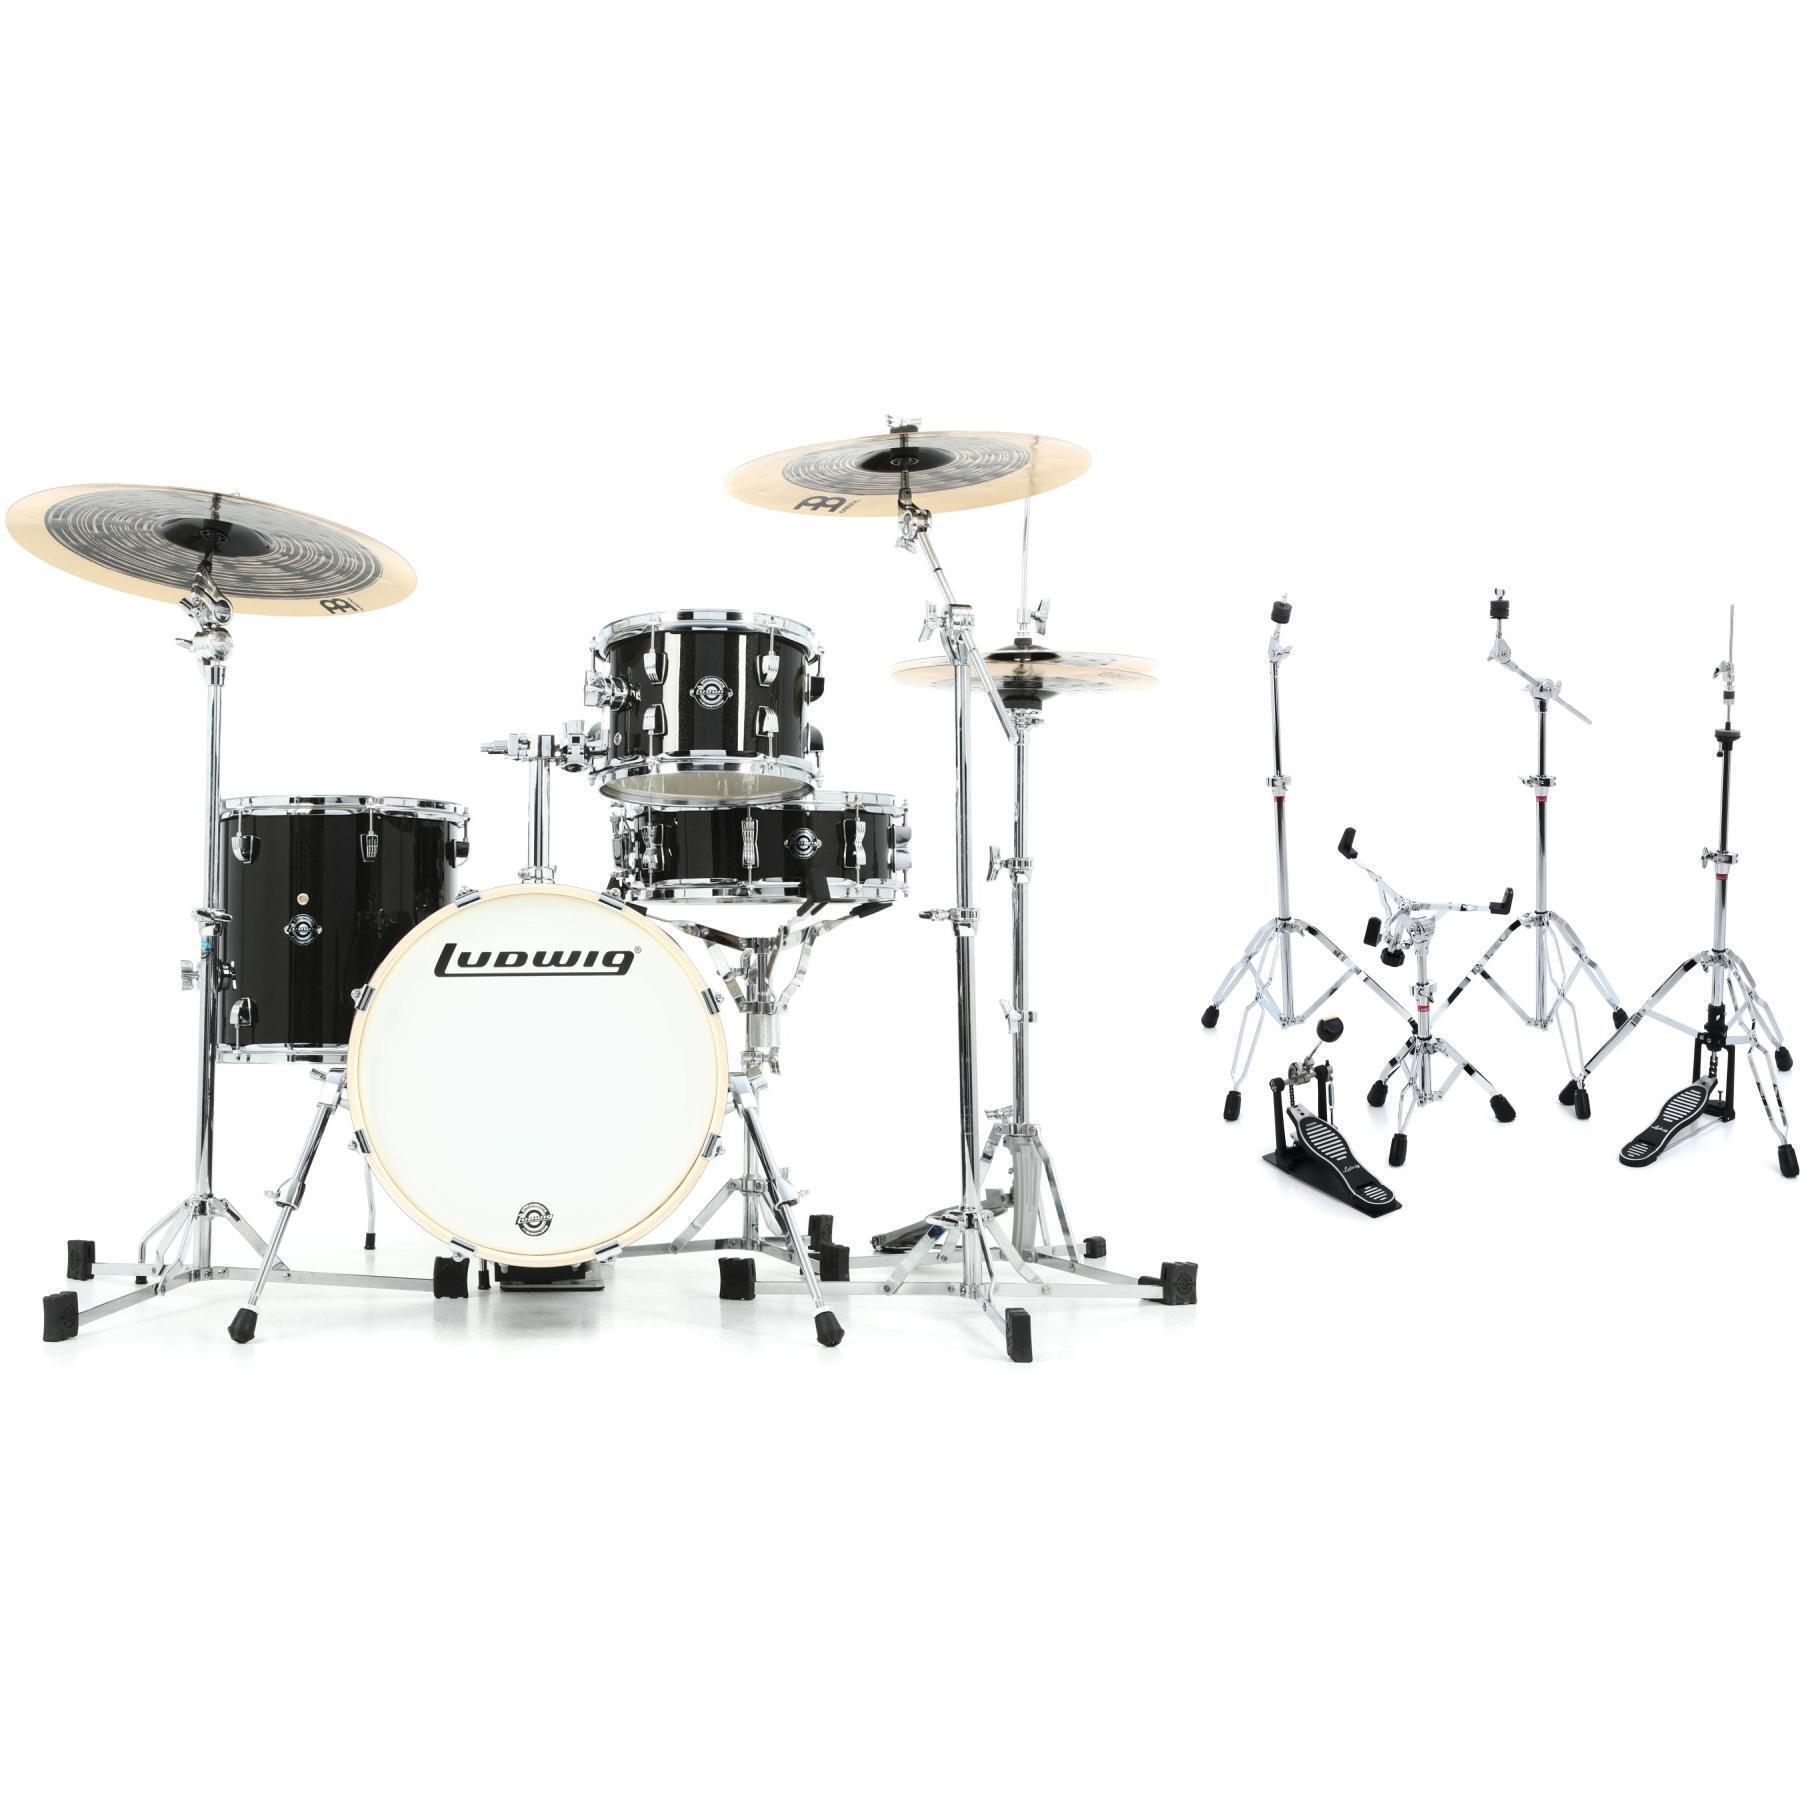 Ludwig Breakbeats 2022 By Questlove 4-piece Shell Pack with Snare Drum -  Black Sparkle and 5-piece 400 Series Hardware Pack